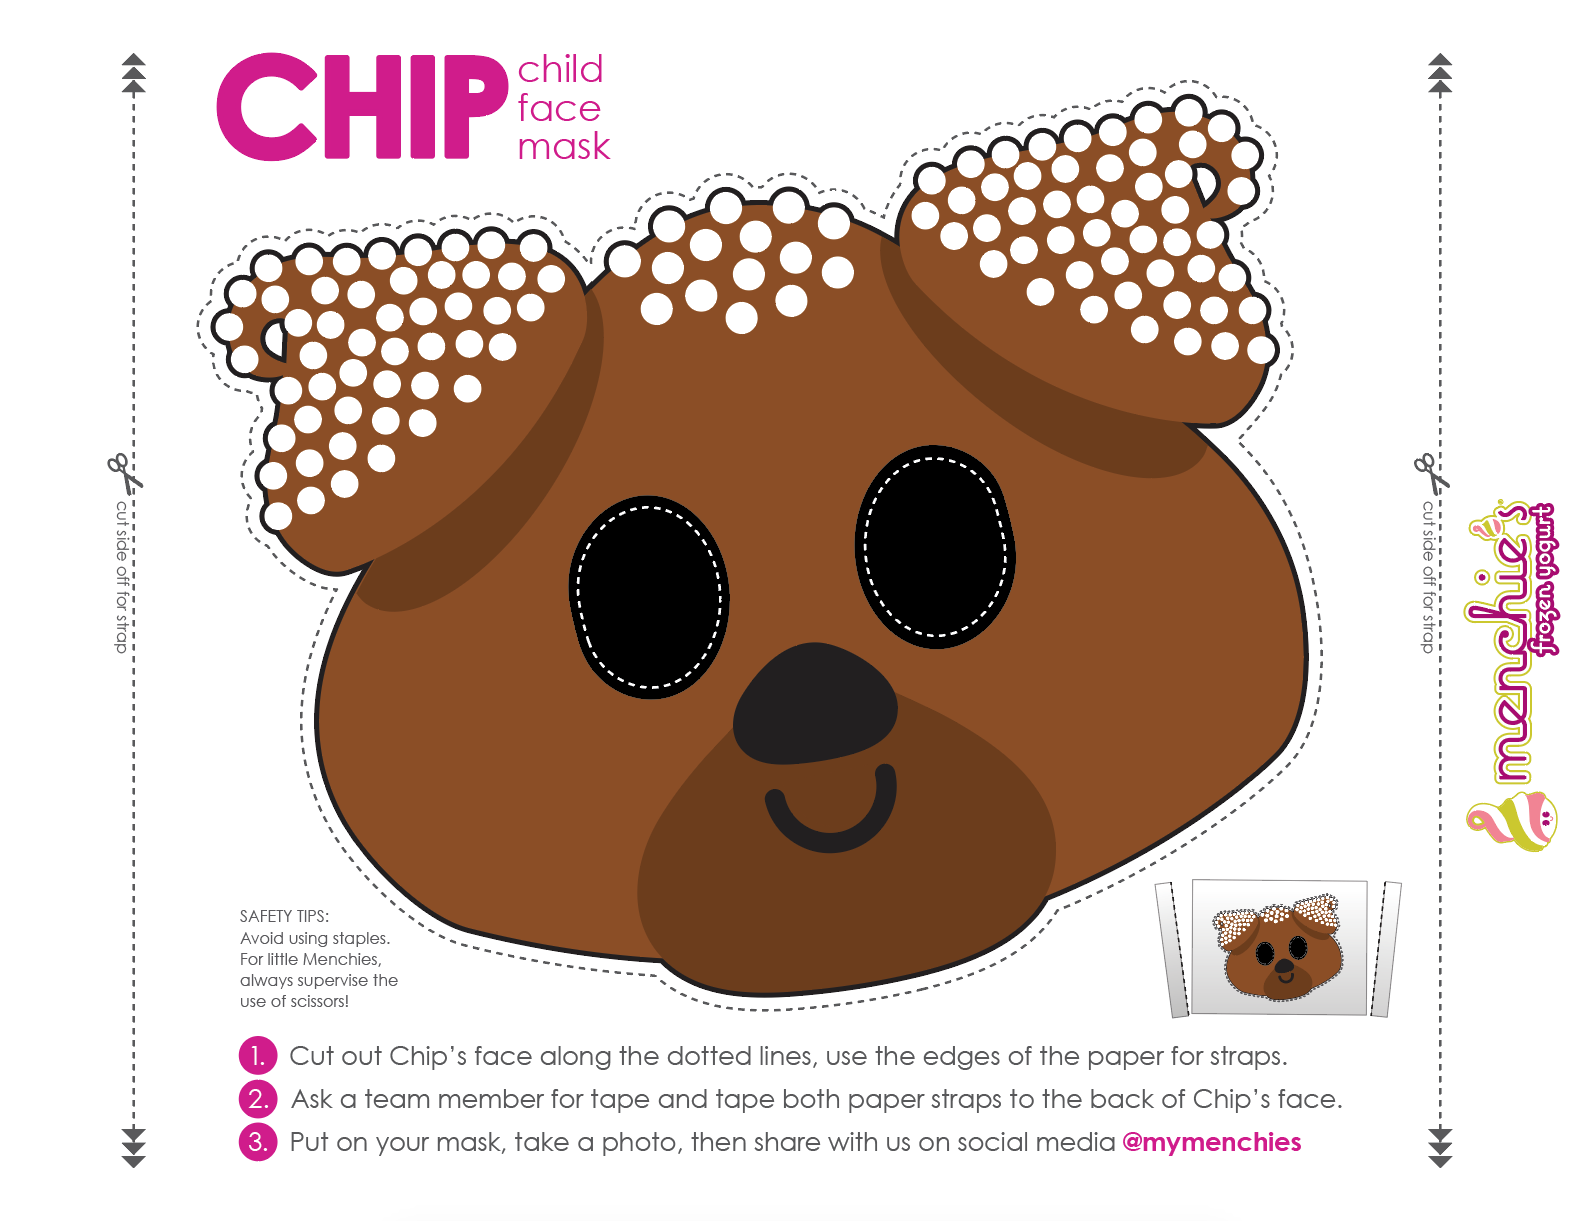 Create a Chip mask!